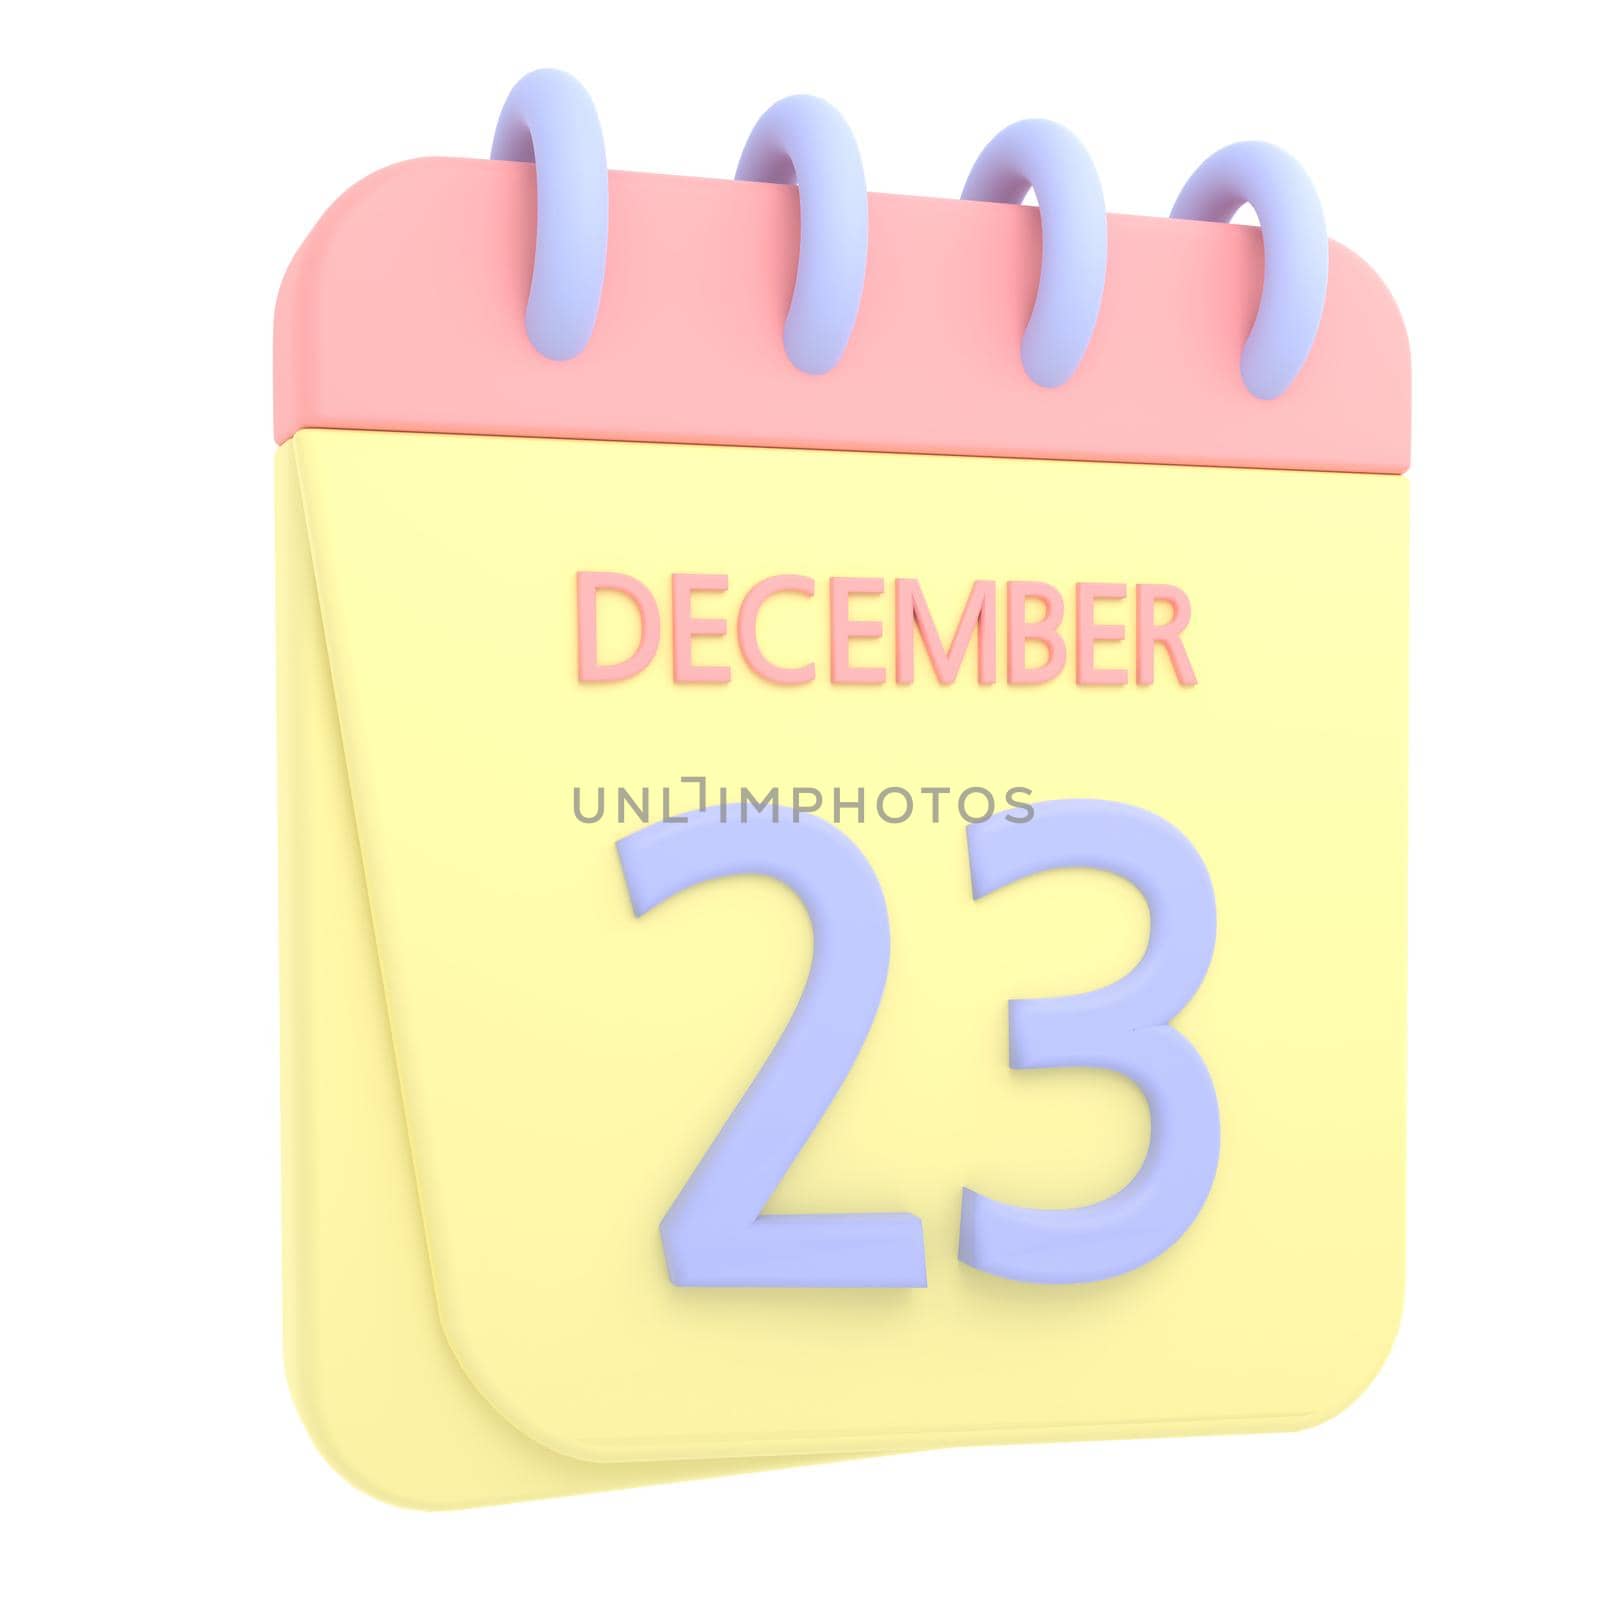 23rd December 3D calendar icon. Web style. High resolution image. White background